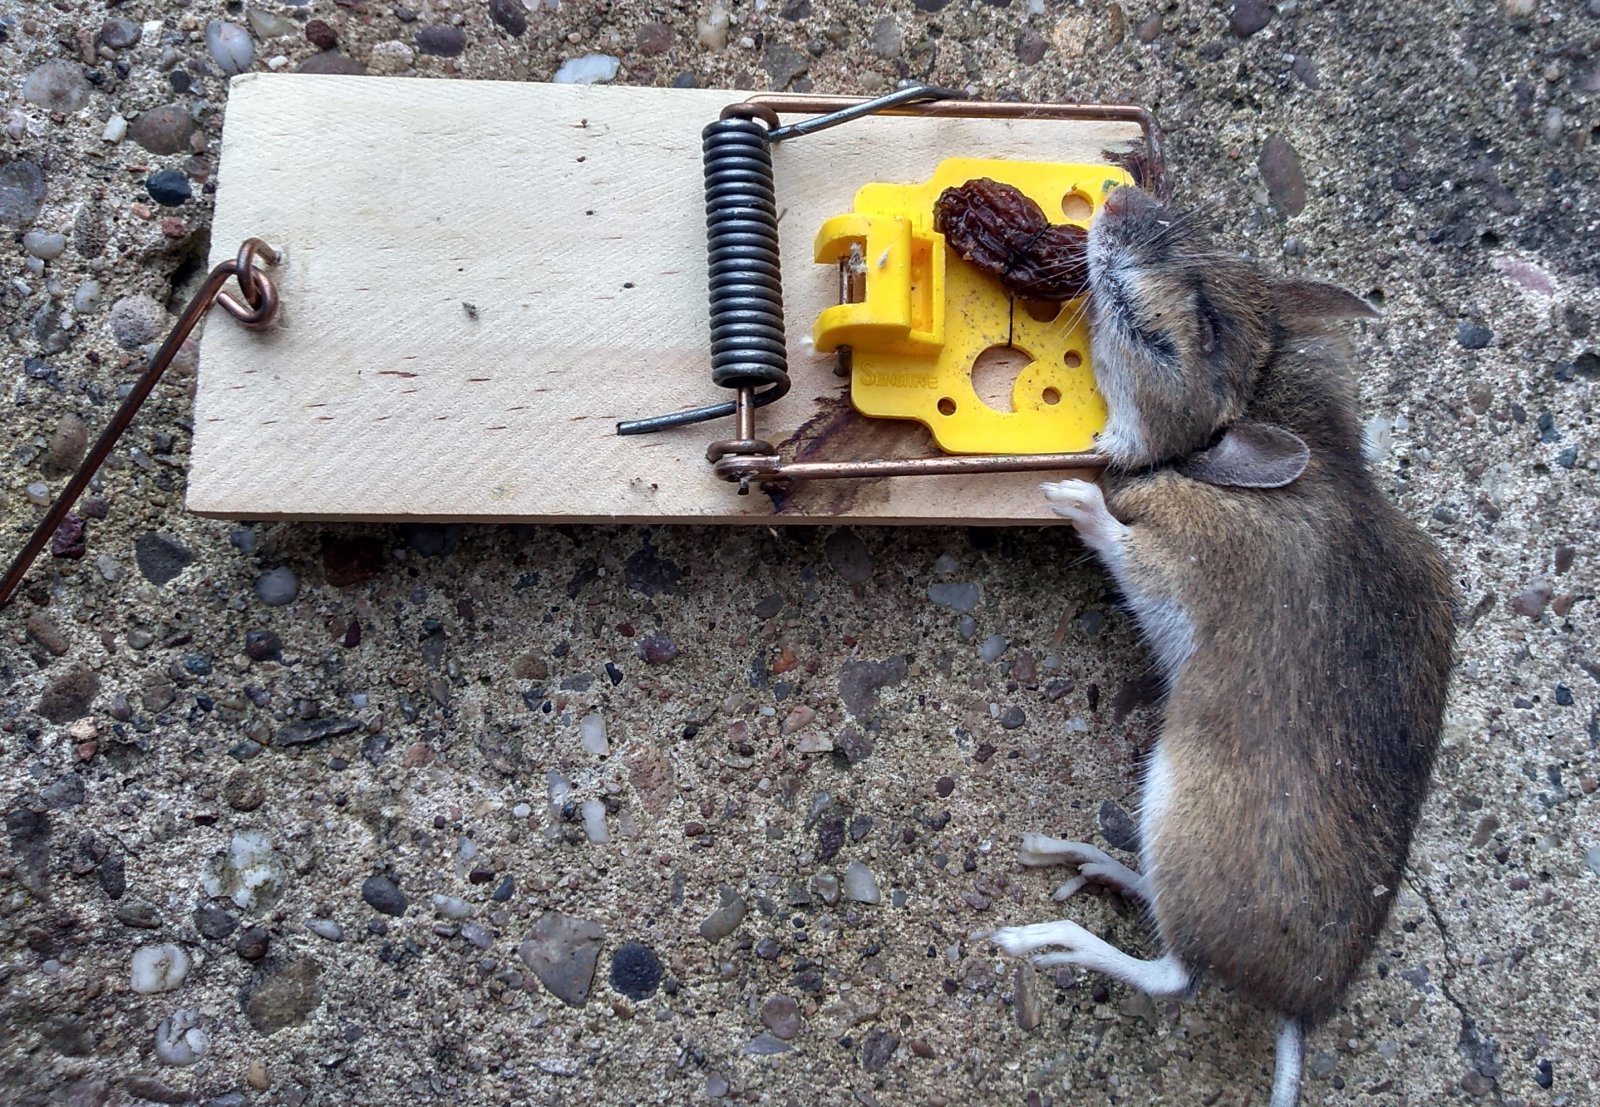 Making the Better MouseTrap even Better, Mouse trap